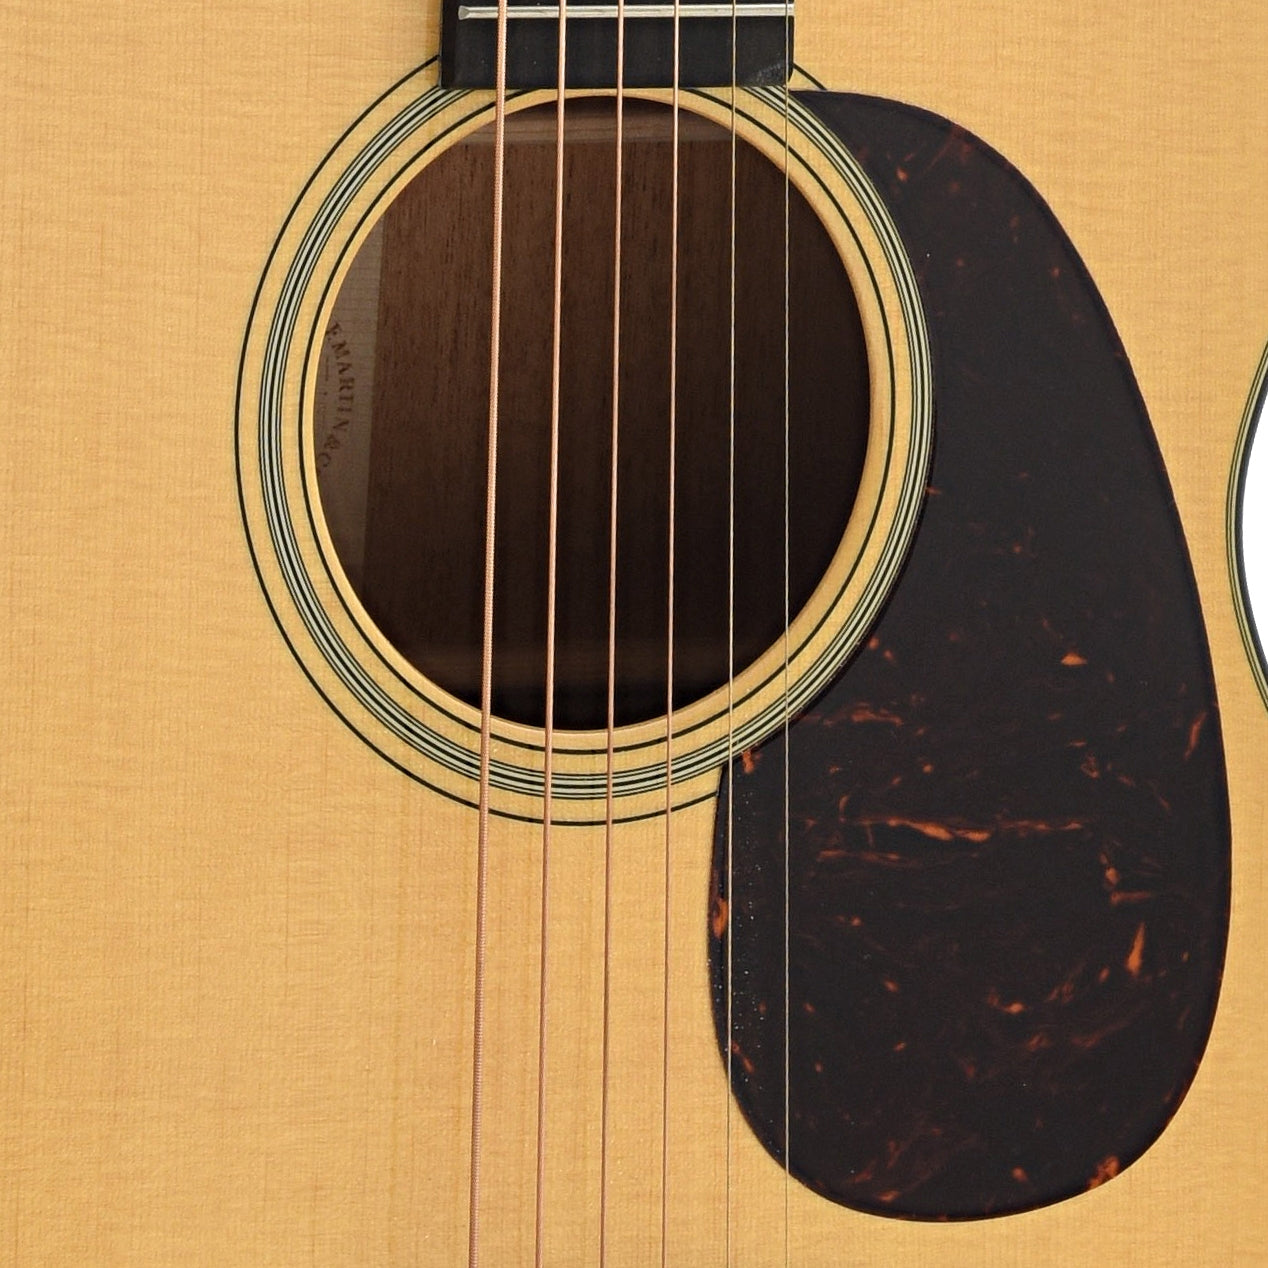 Soundhole and Pickguard of Martin 00-18 Guitar